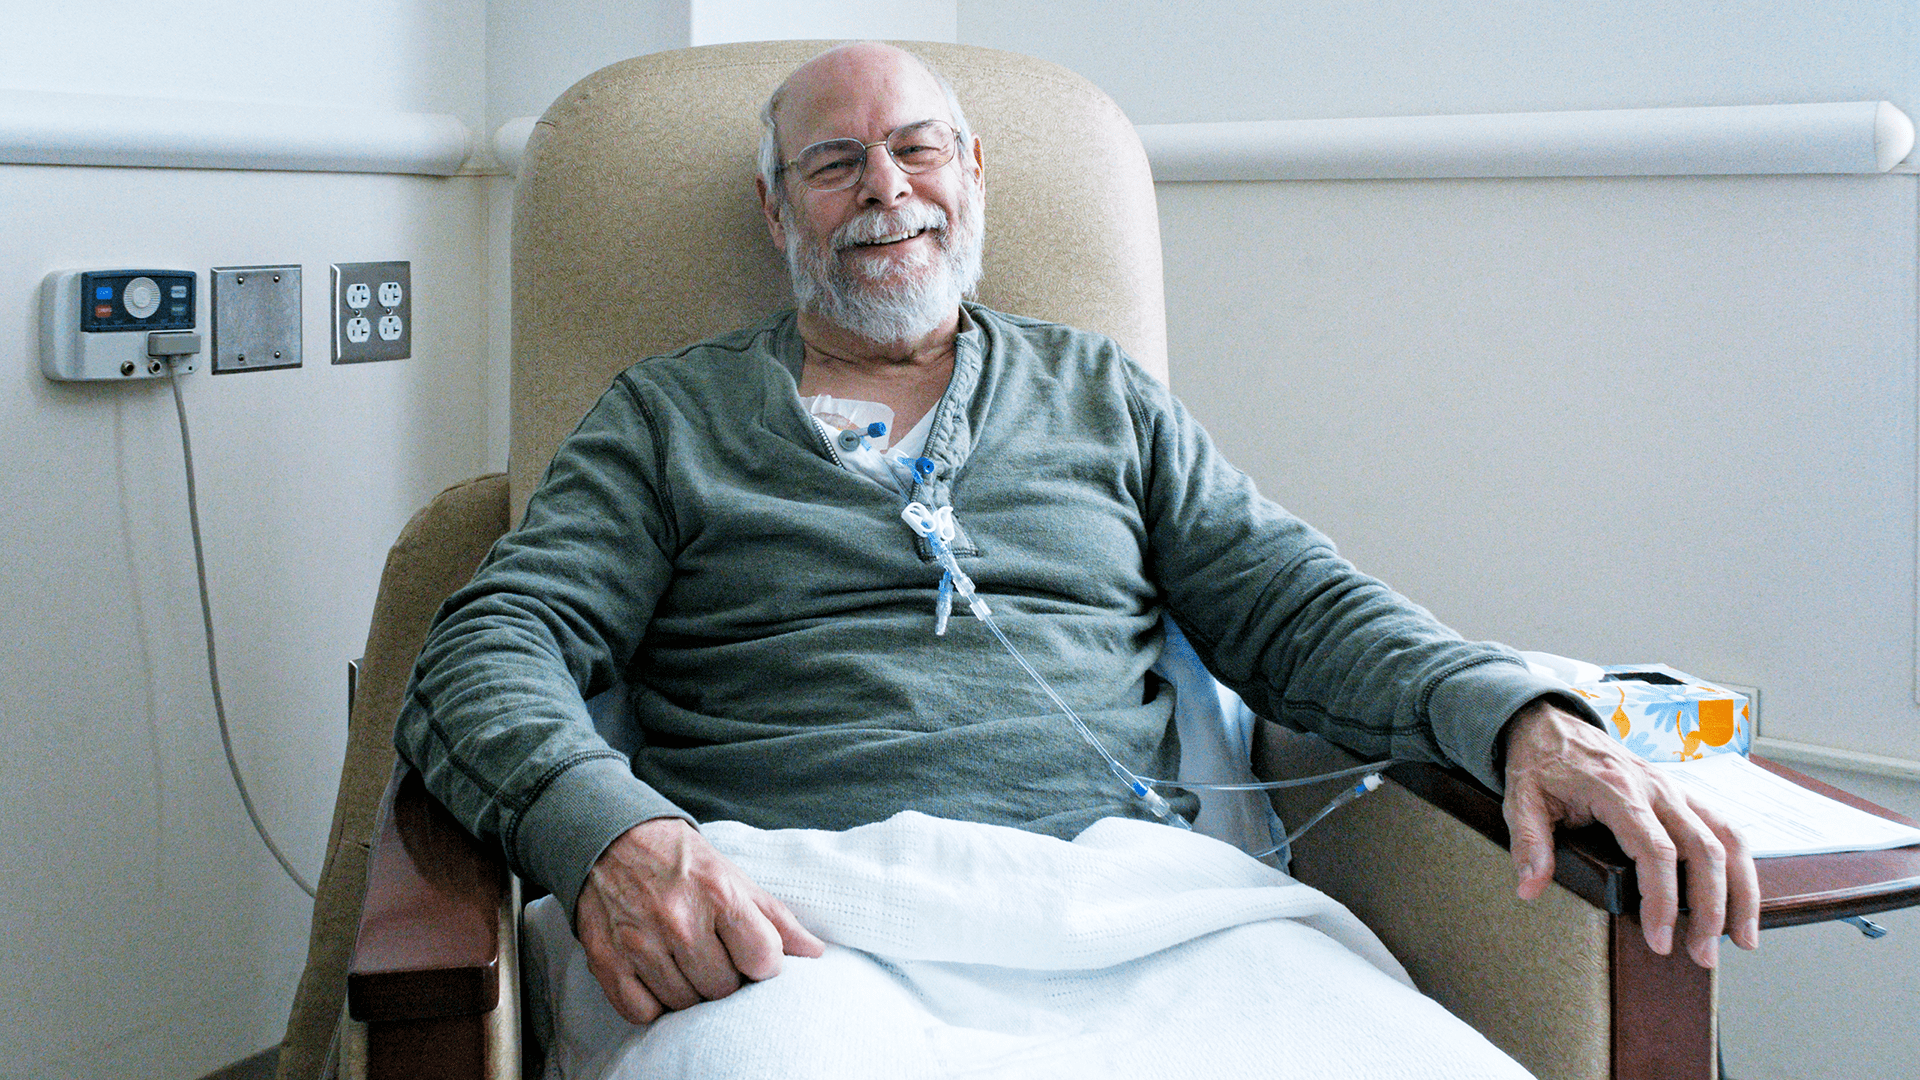 A smiling senior man sits in a chair receiving cancer treatment.